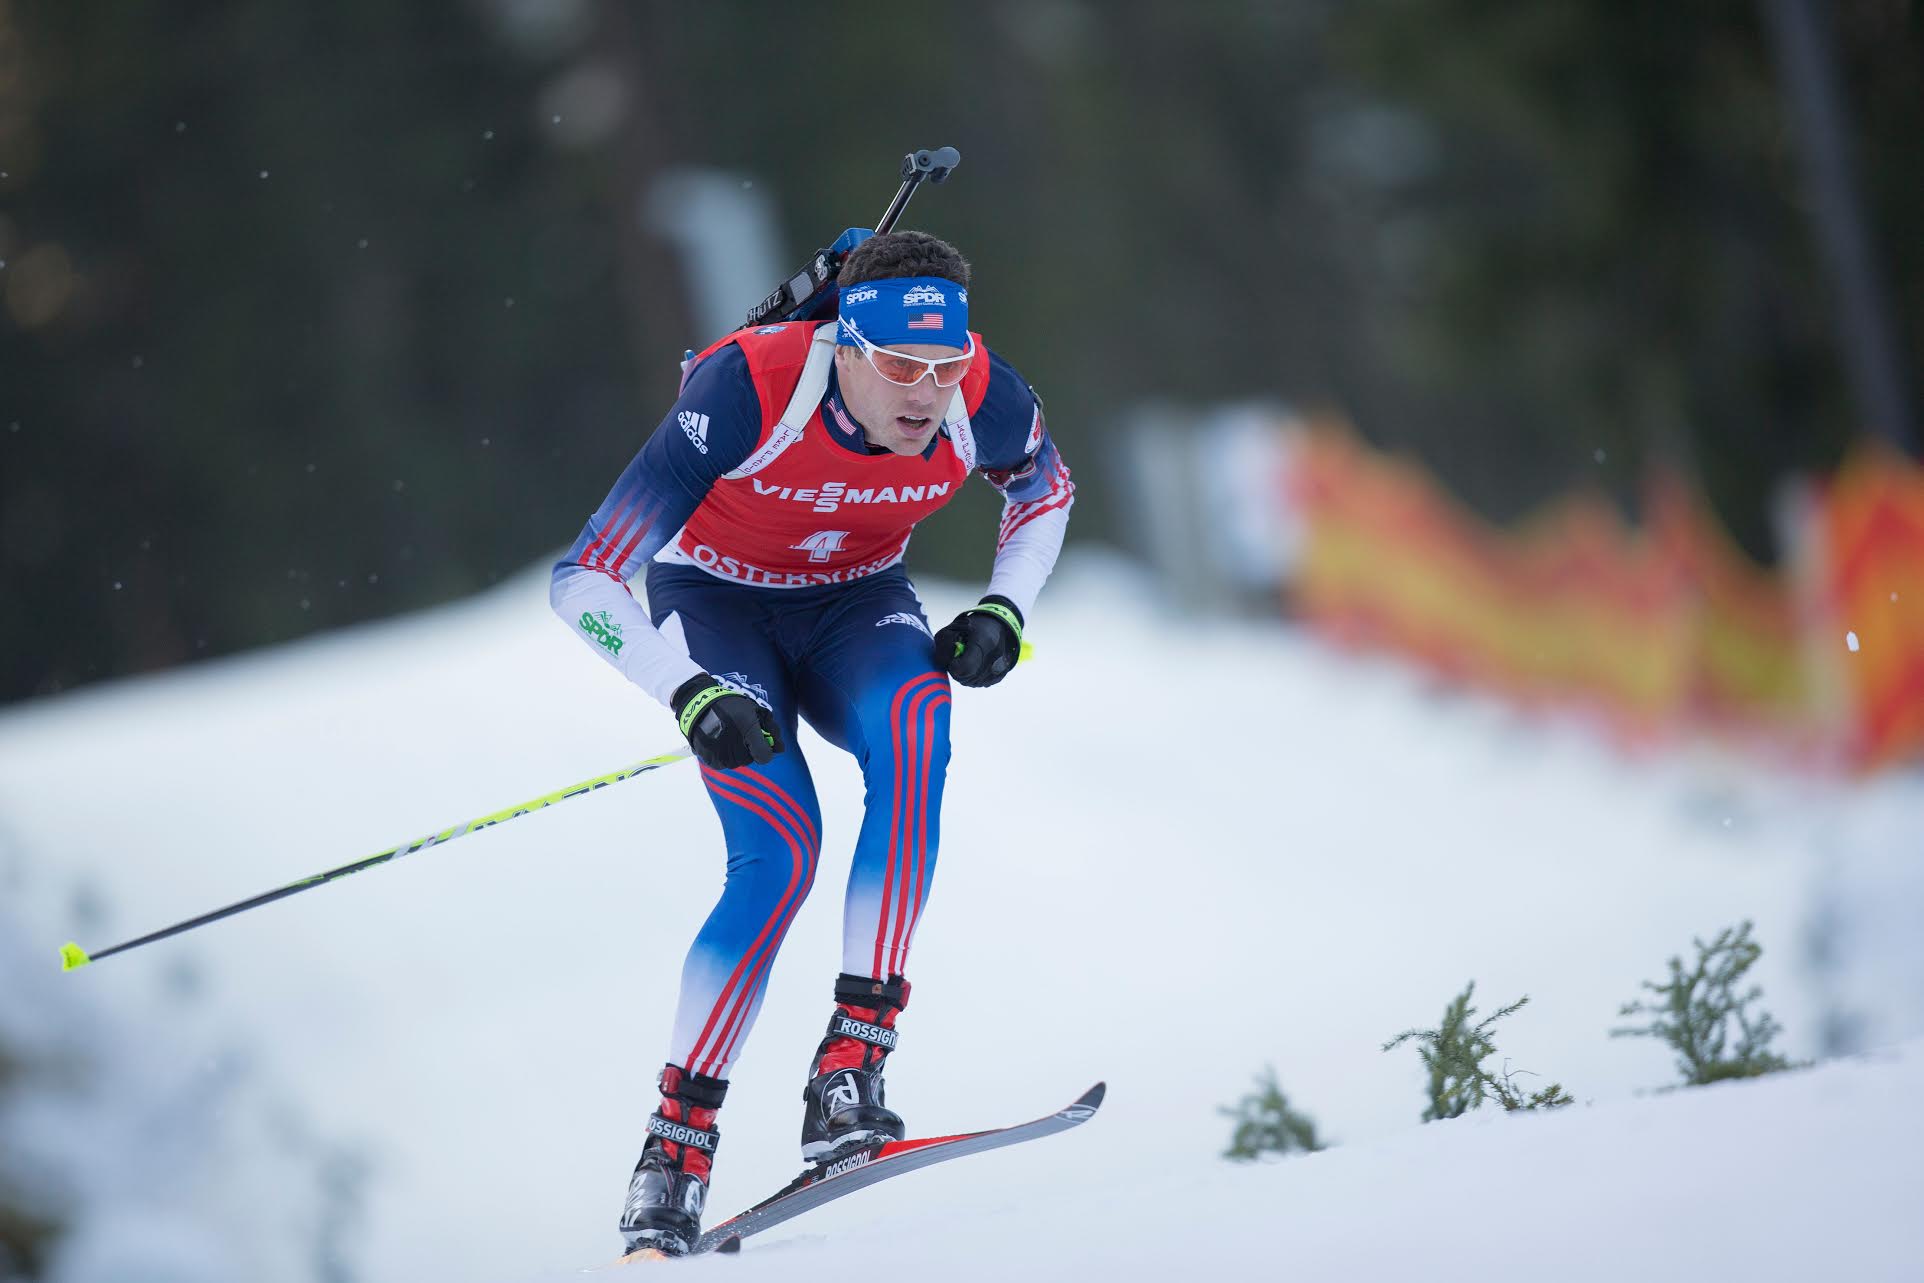 Tim Burke en route to a top-20 performance in today's World Cup sprint. Photo: USBA/NordicFocus.com.